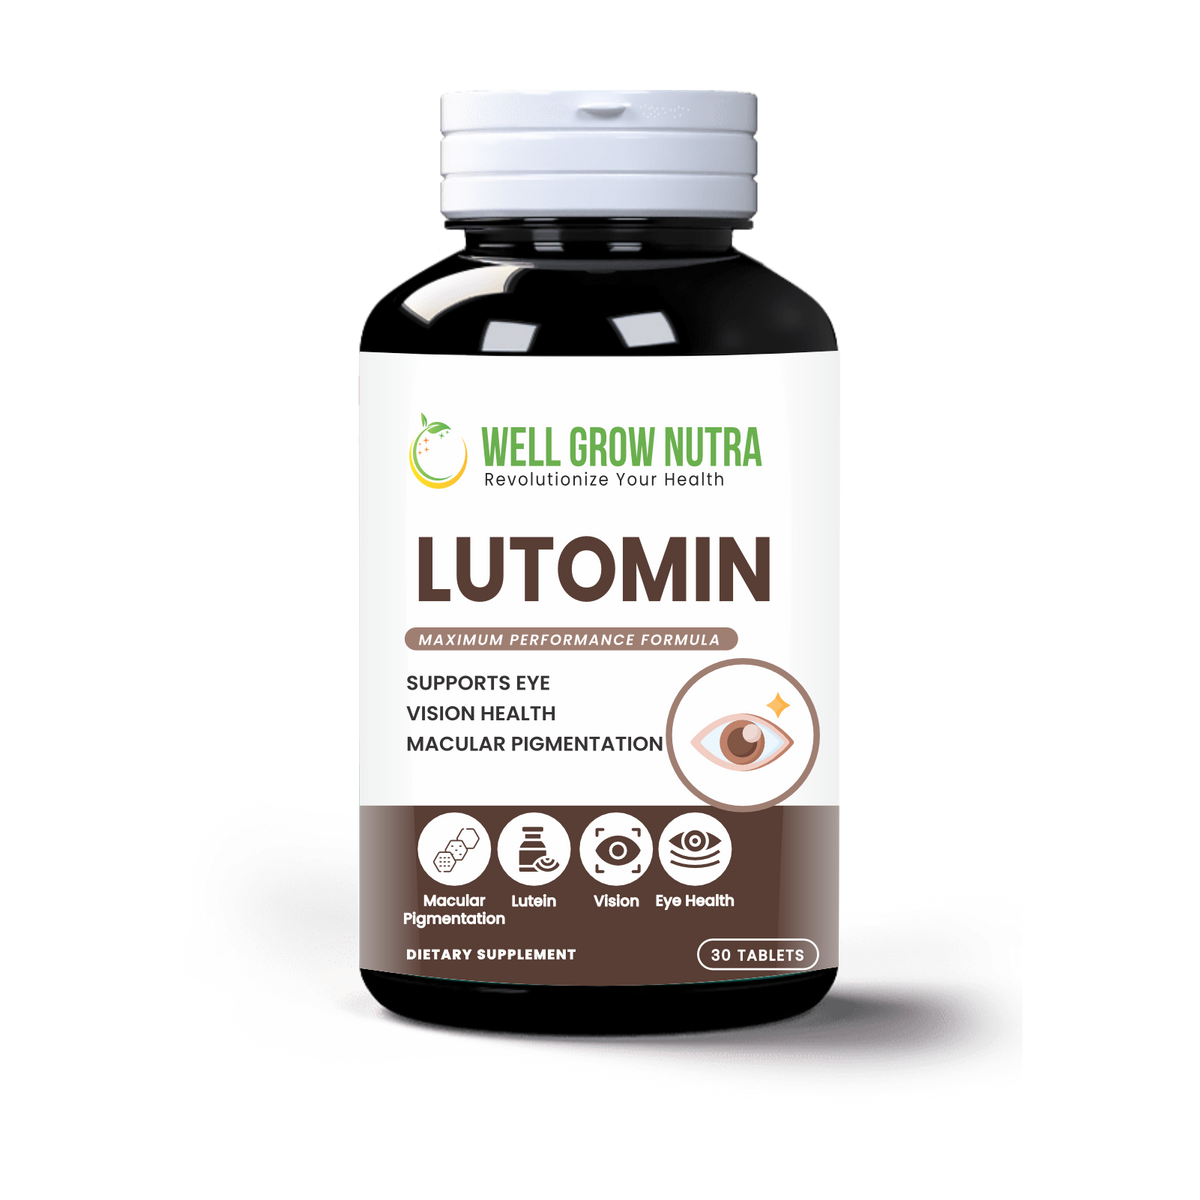 Lutomin